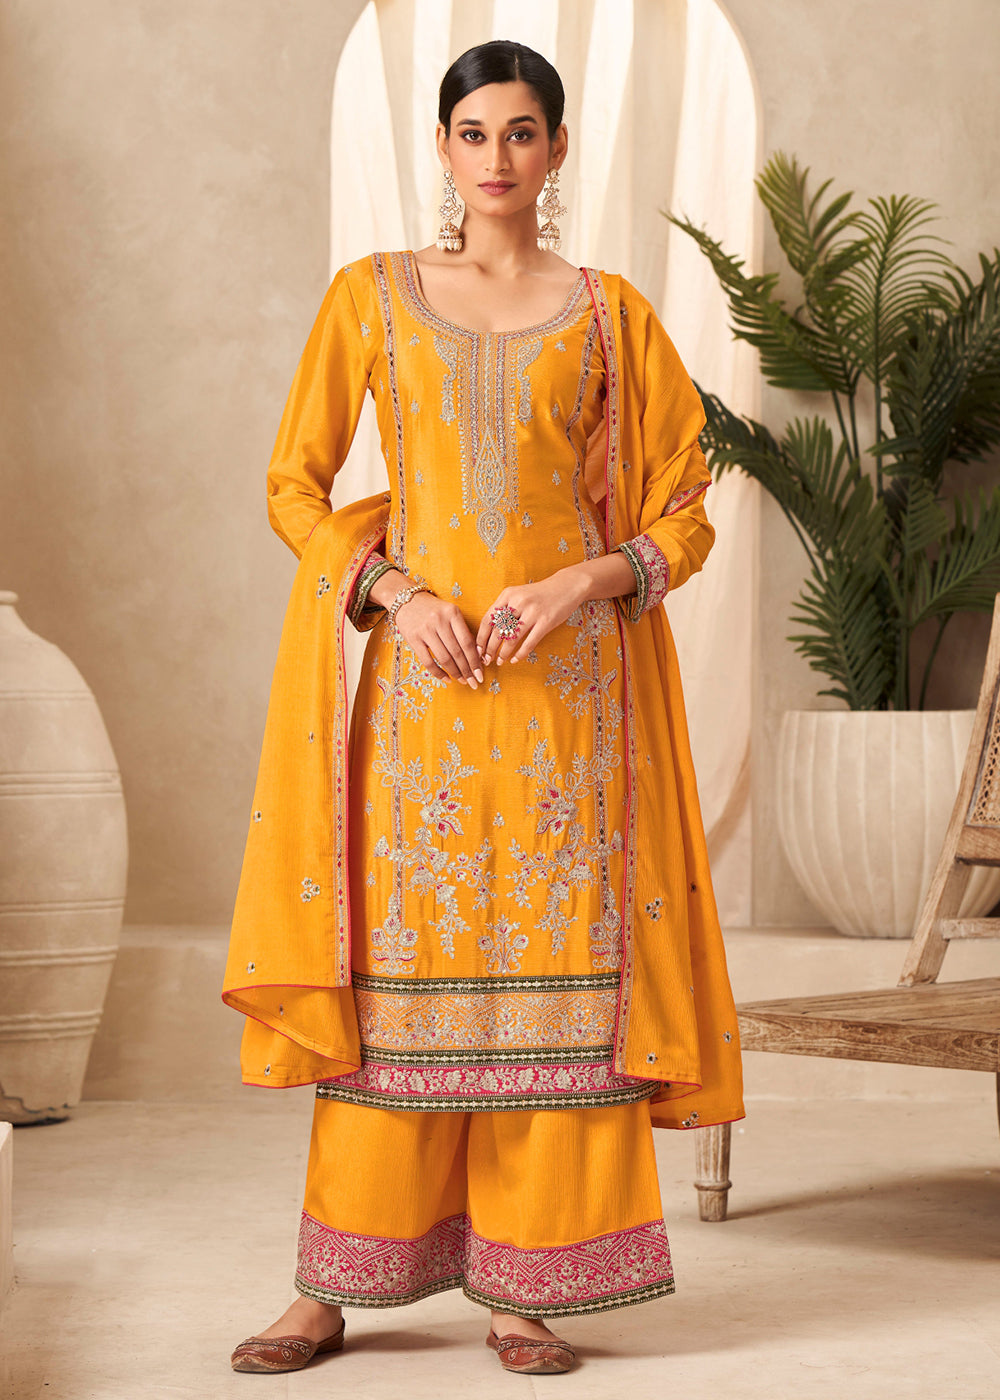 Buy Now Bright Yellow Heavy Chinnon Wedding Festive Salwar Suit Online in USA, UK, Canada, Germany, Australia & Worldwide at Empress Clothing. 